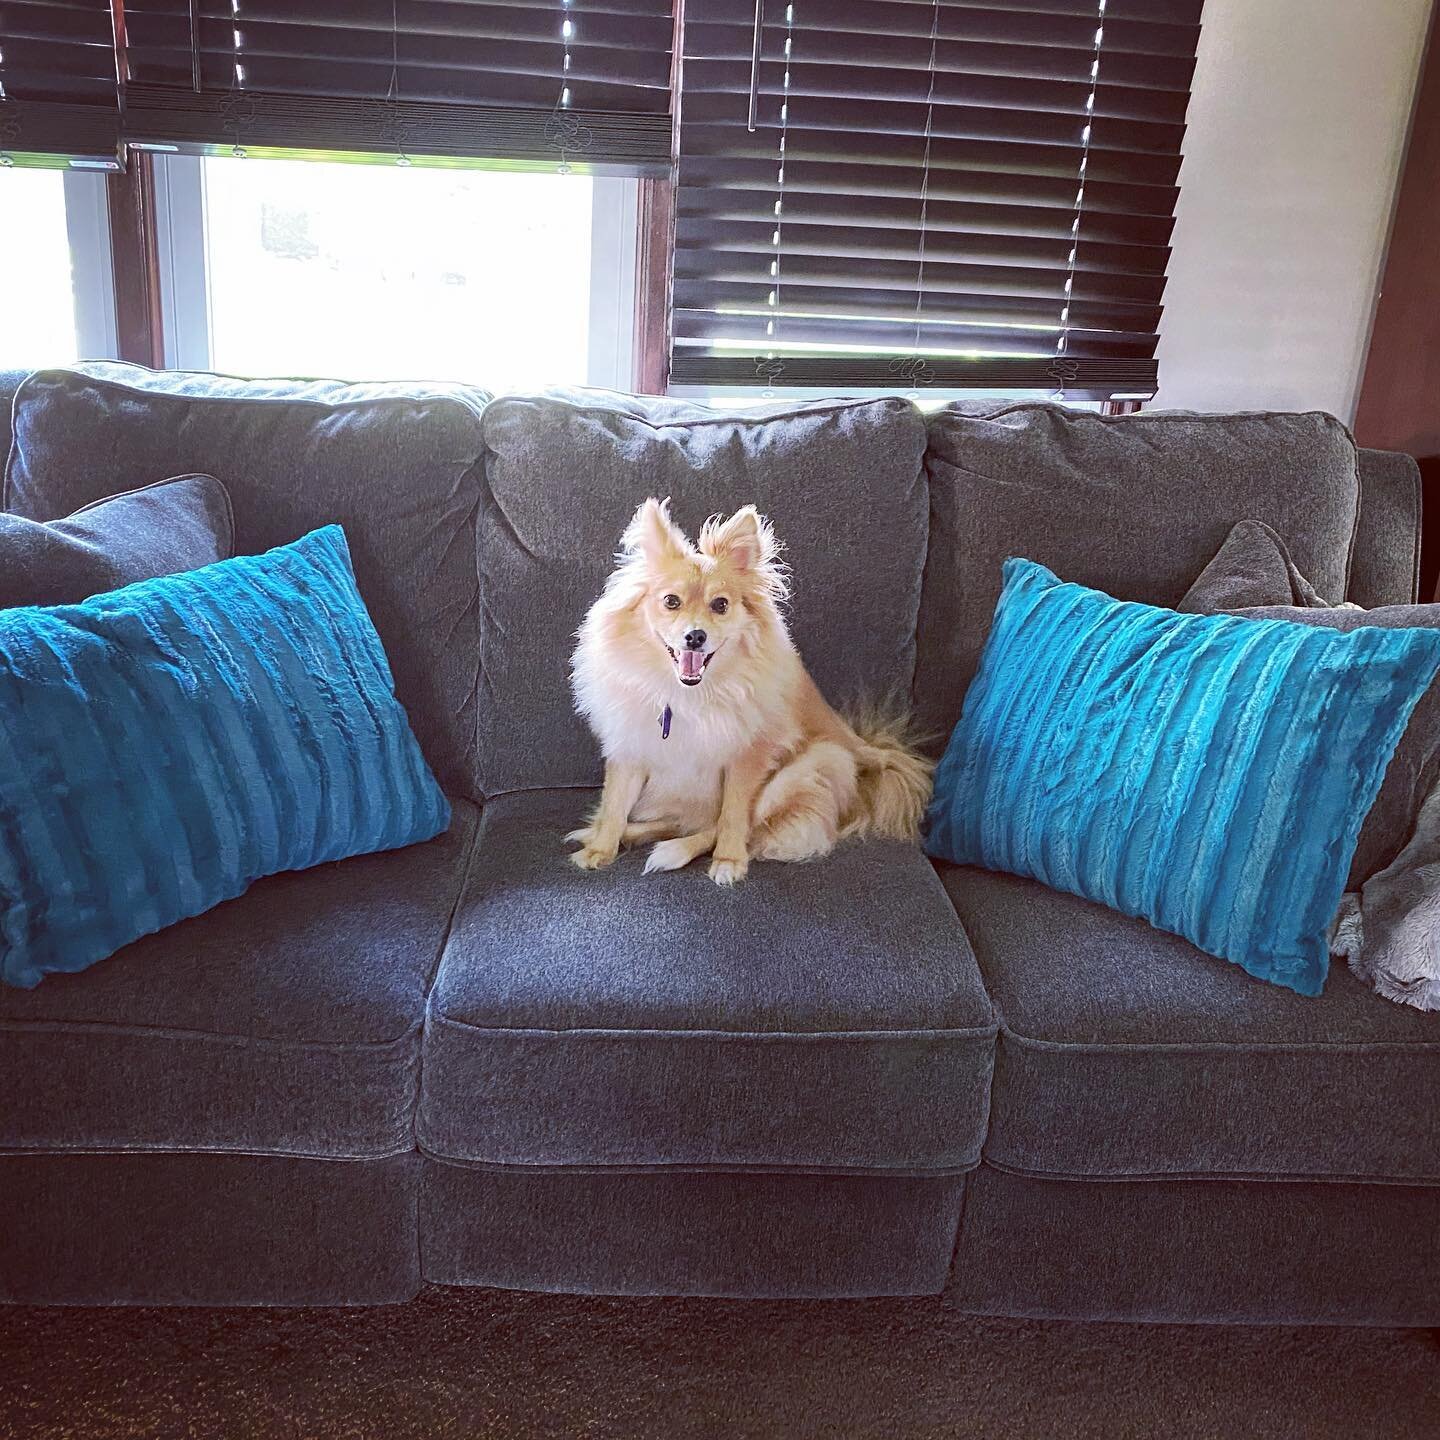 I made new pillow covers that are super soft and the best color! You barely notice them though, because of the cute lil&rsquo; floof stealing the scene. 🐕💕#dogsofinstagram #weeklyfluff #pomeranian